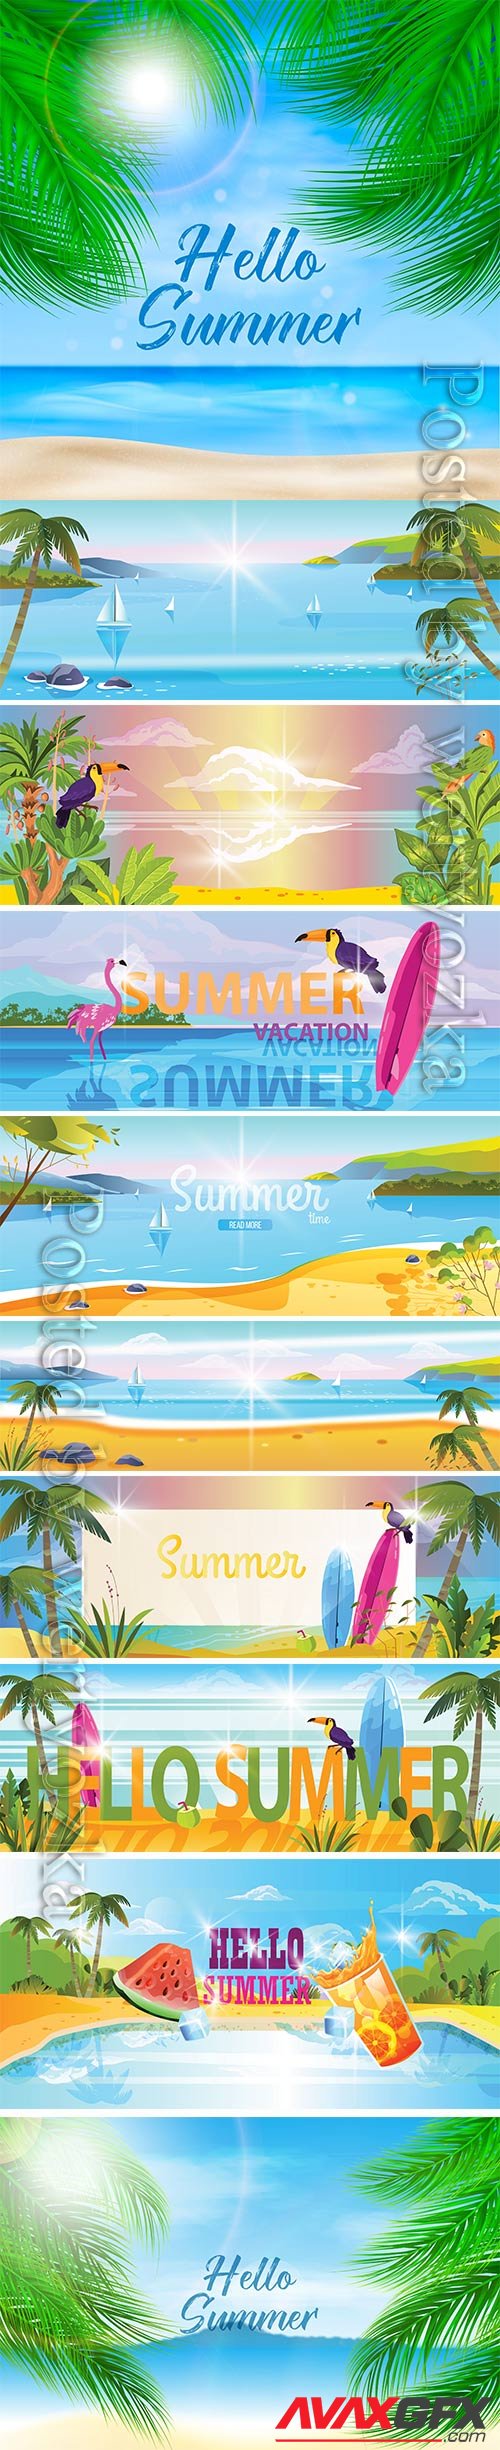 Summer vacation banner with topical landscape view